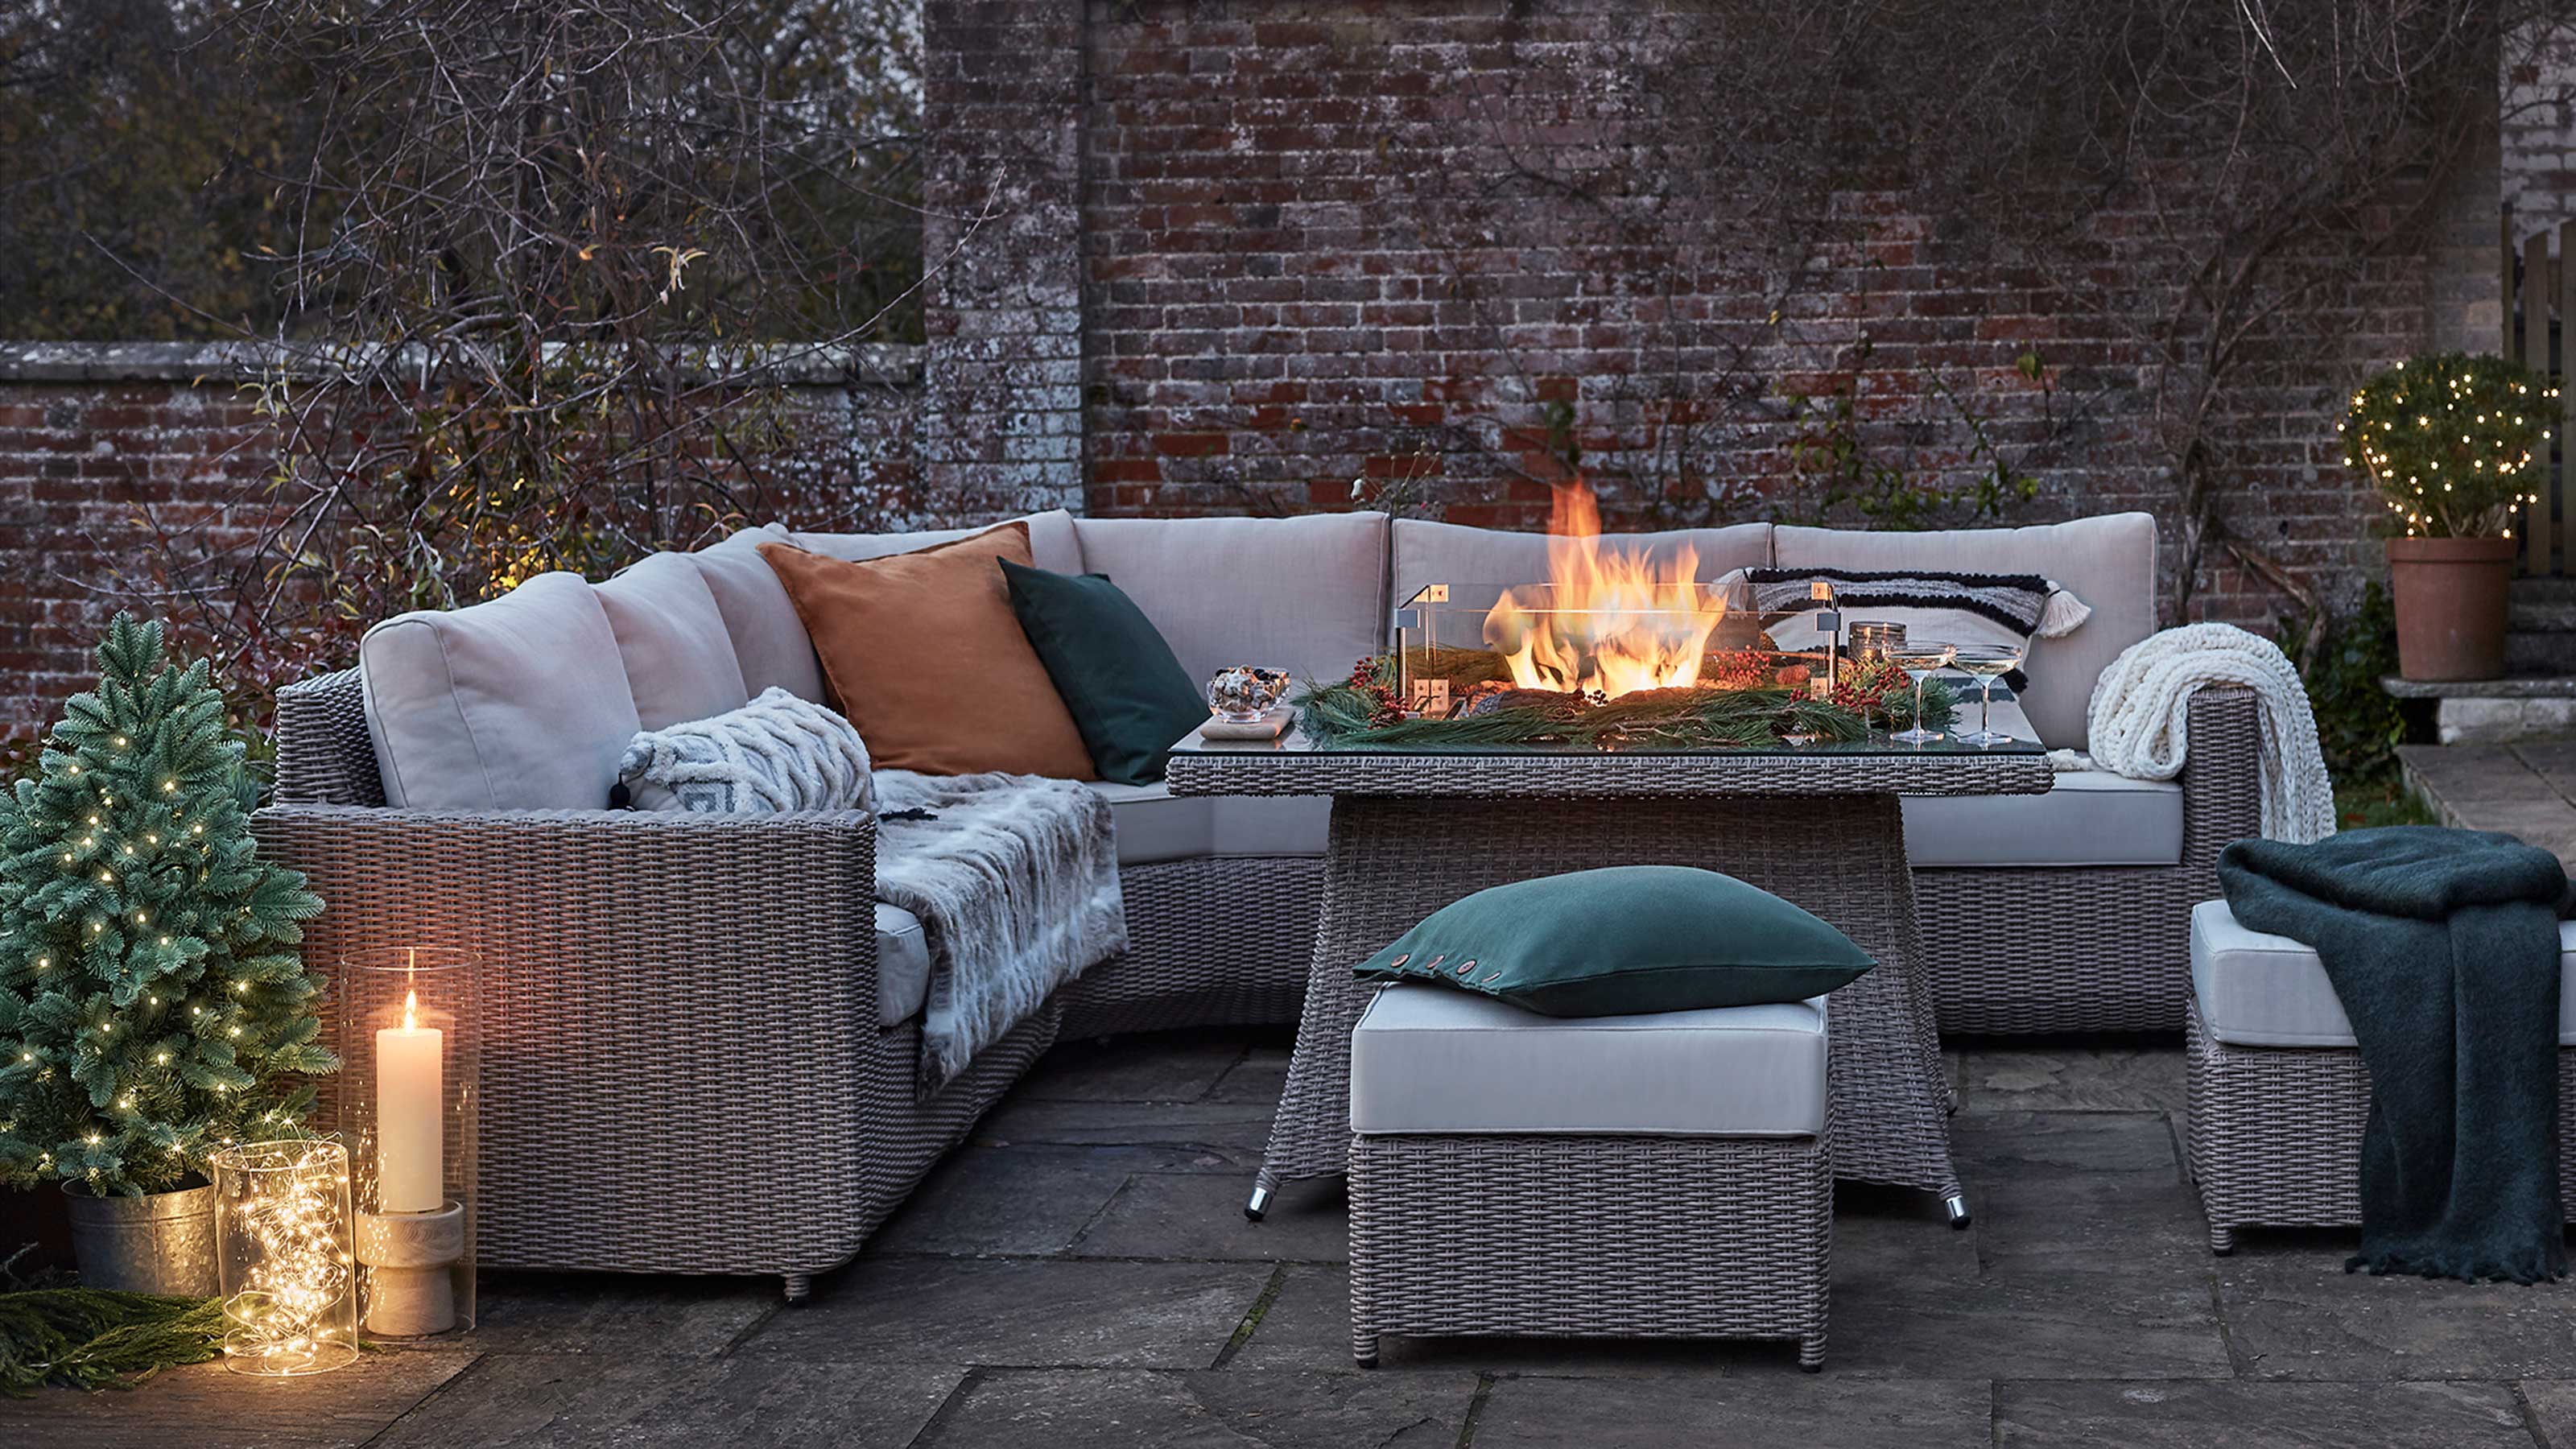 Winter patio ideas: 11 ways to make the most of your backyard in cooler  weather | Gardeningetc